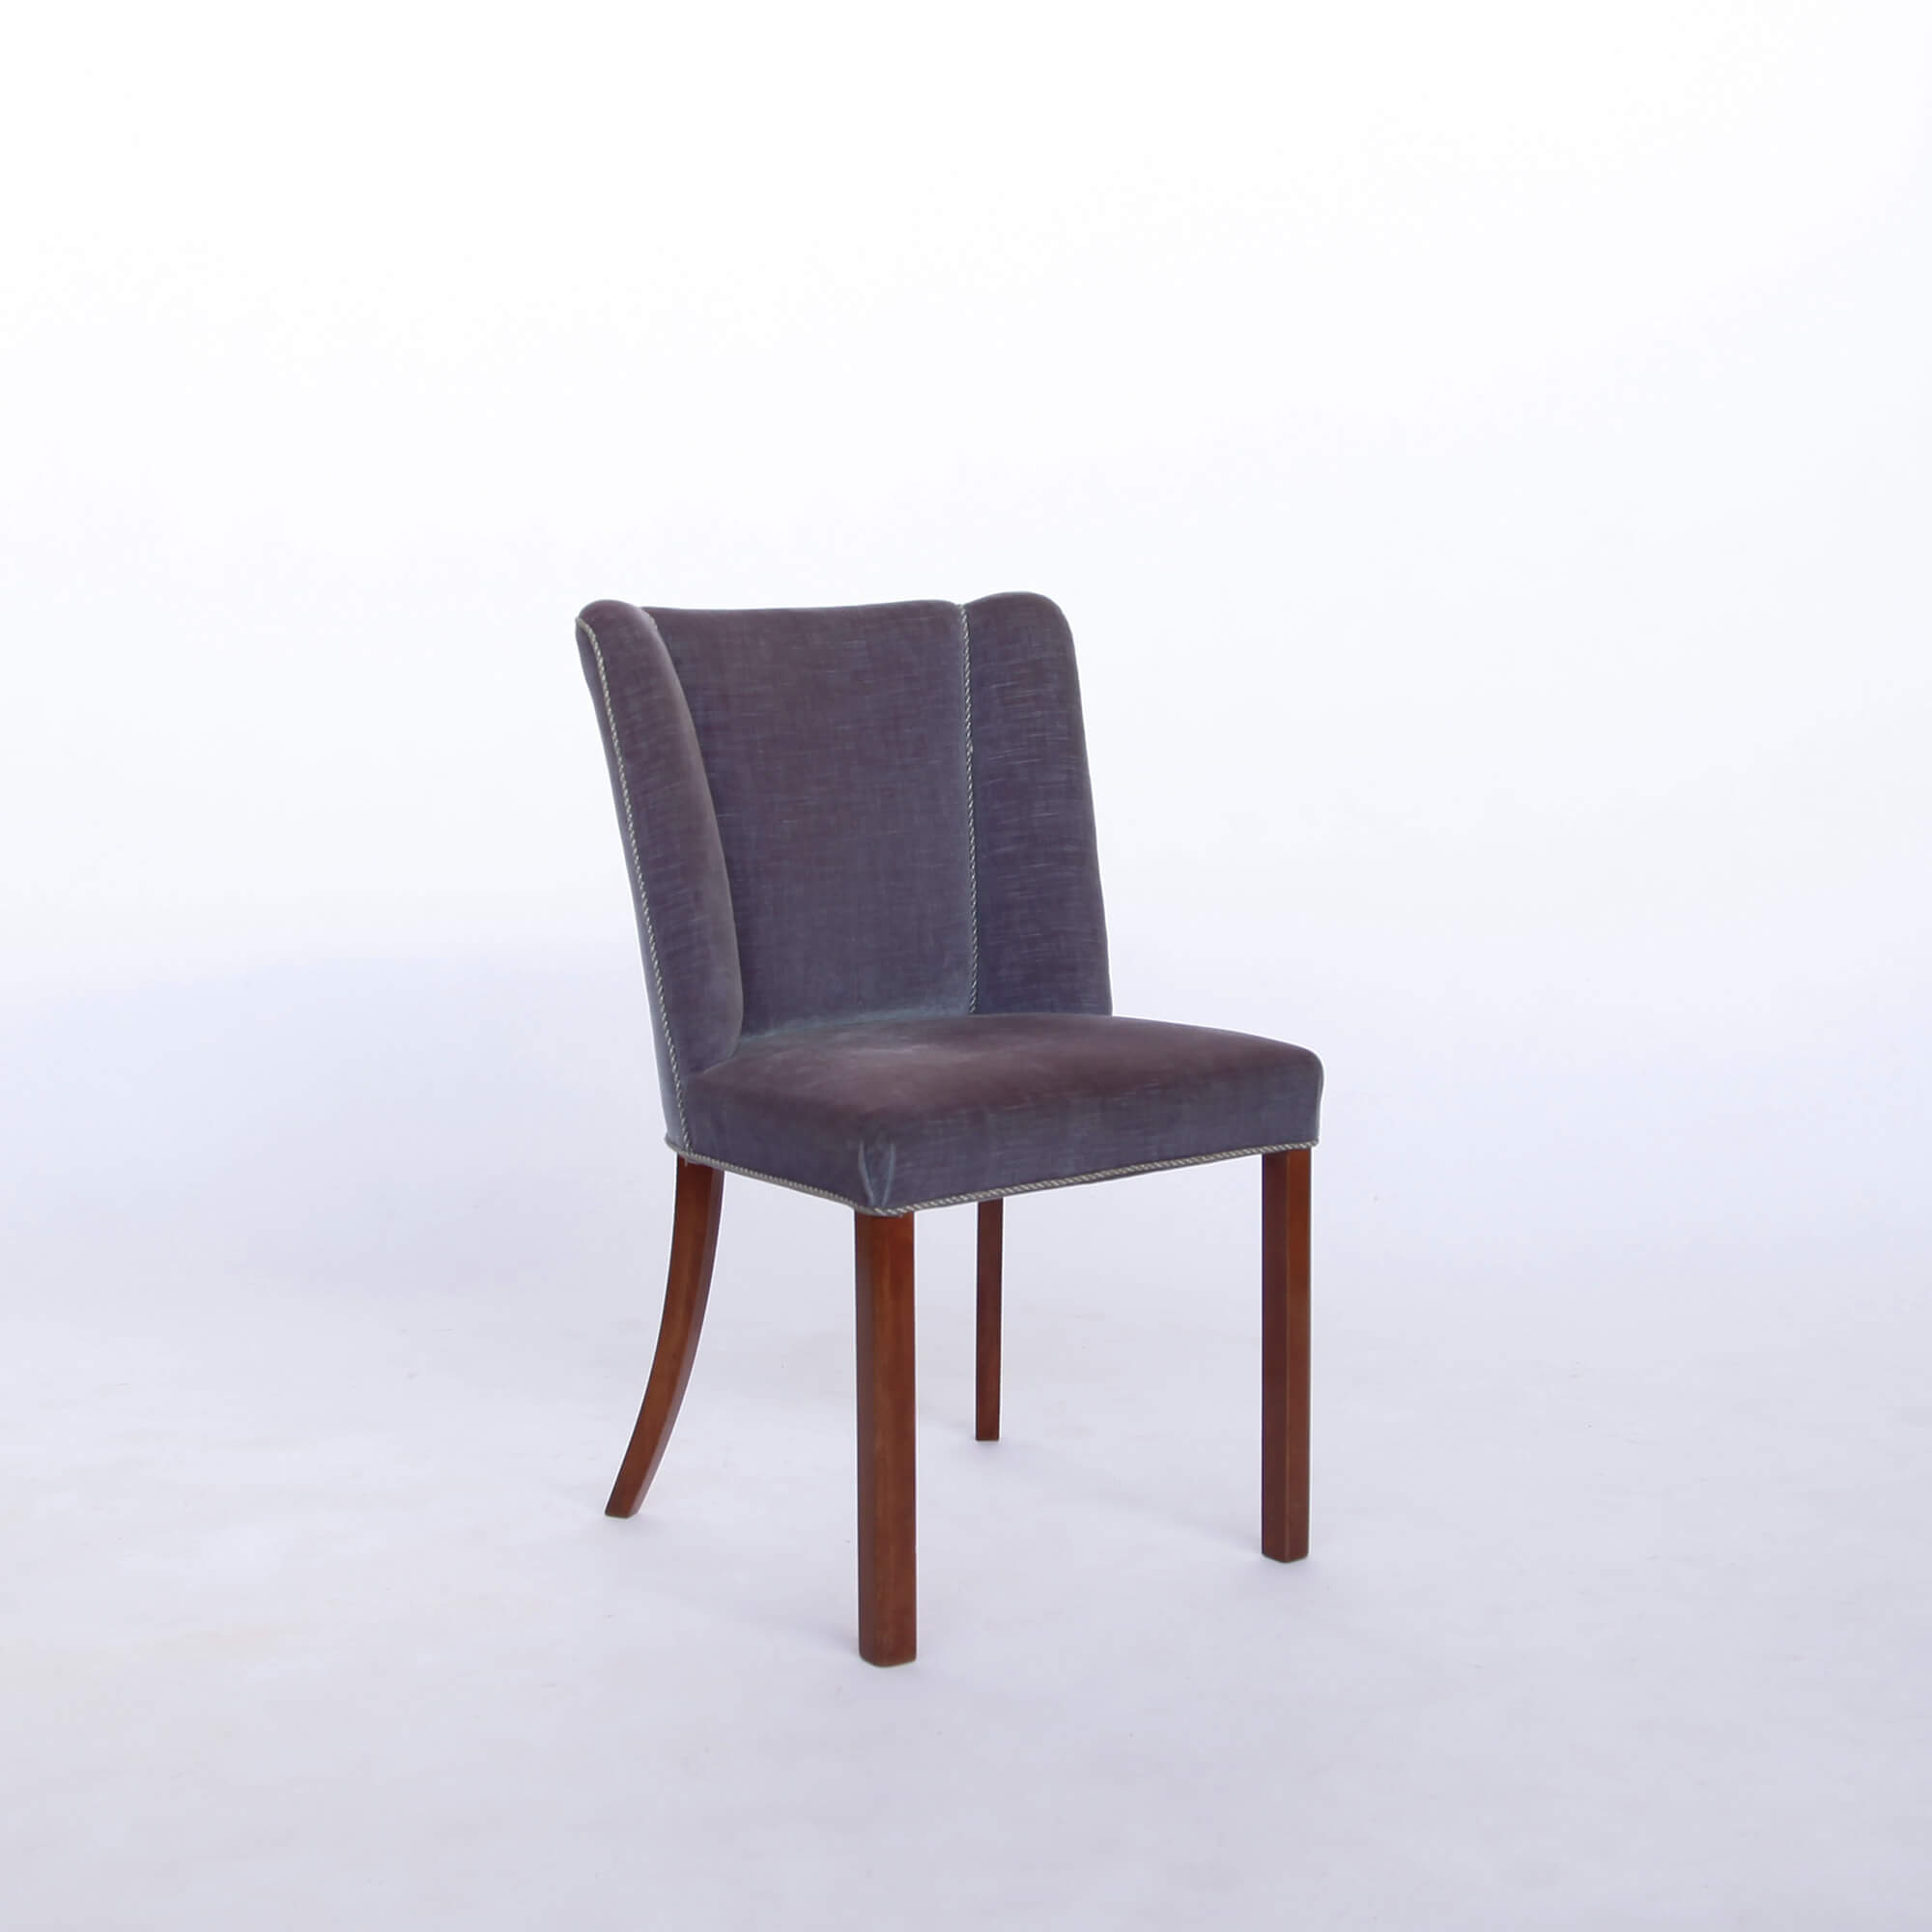 1940s Danish Cabinetmaster Upholstered Side Chair